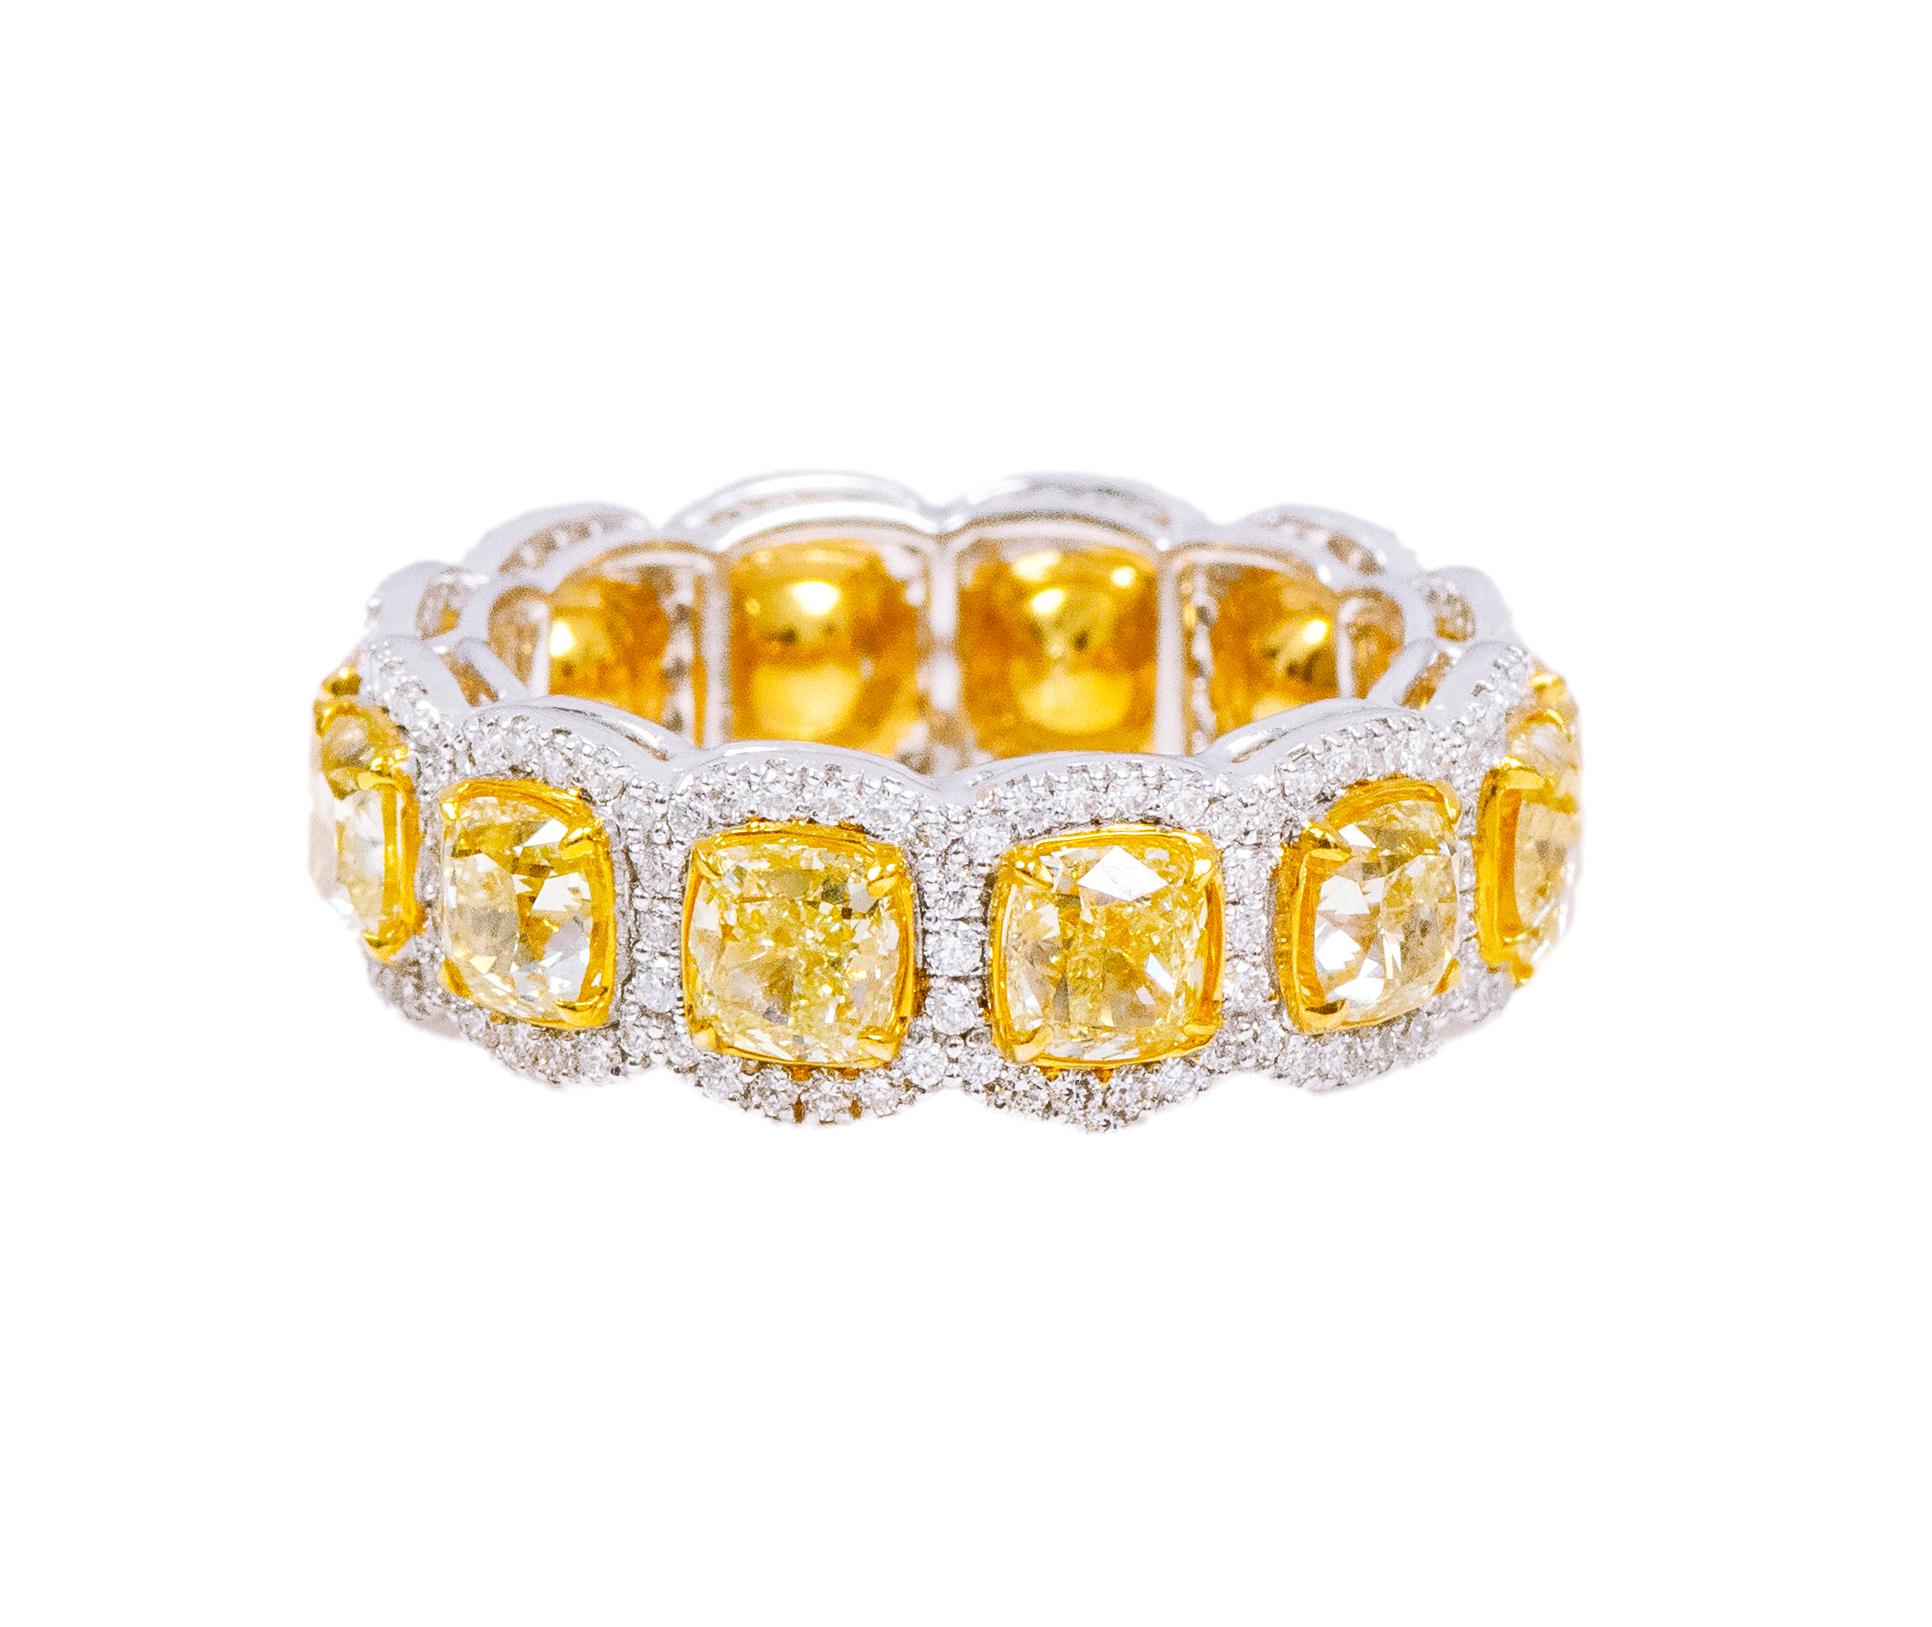 18 Karat Gold 6.84 Carat Fancy Yellow and Diamond Eternity Band Ring

Elevate your jewelry collection to new heights with our 6.84 Carat Fancy Yellow and Diamond Eternity Band Ring—a timeless masterpiece that embodies opulence, vibrancy, and